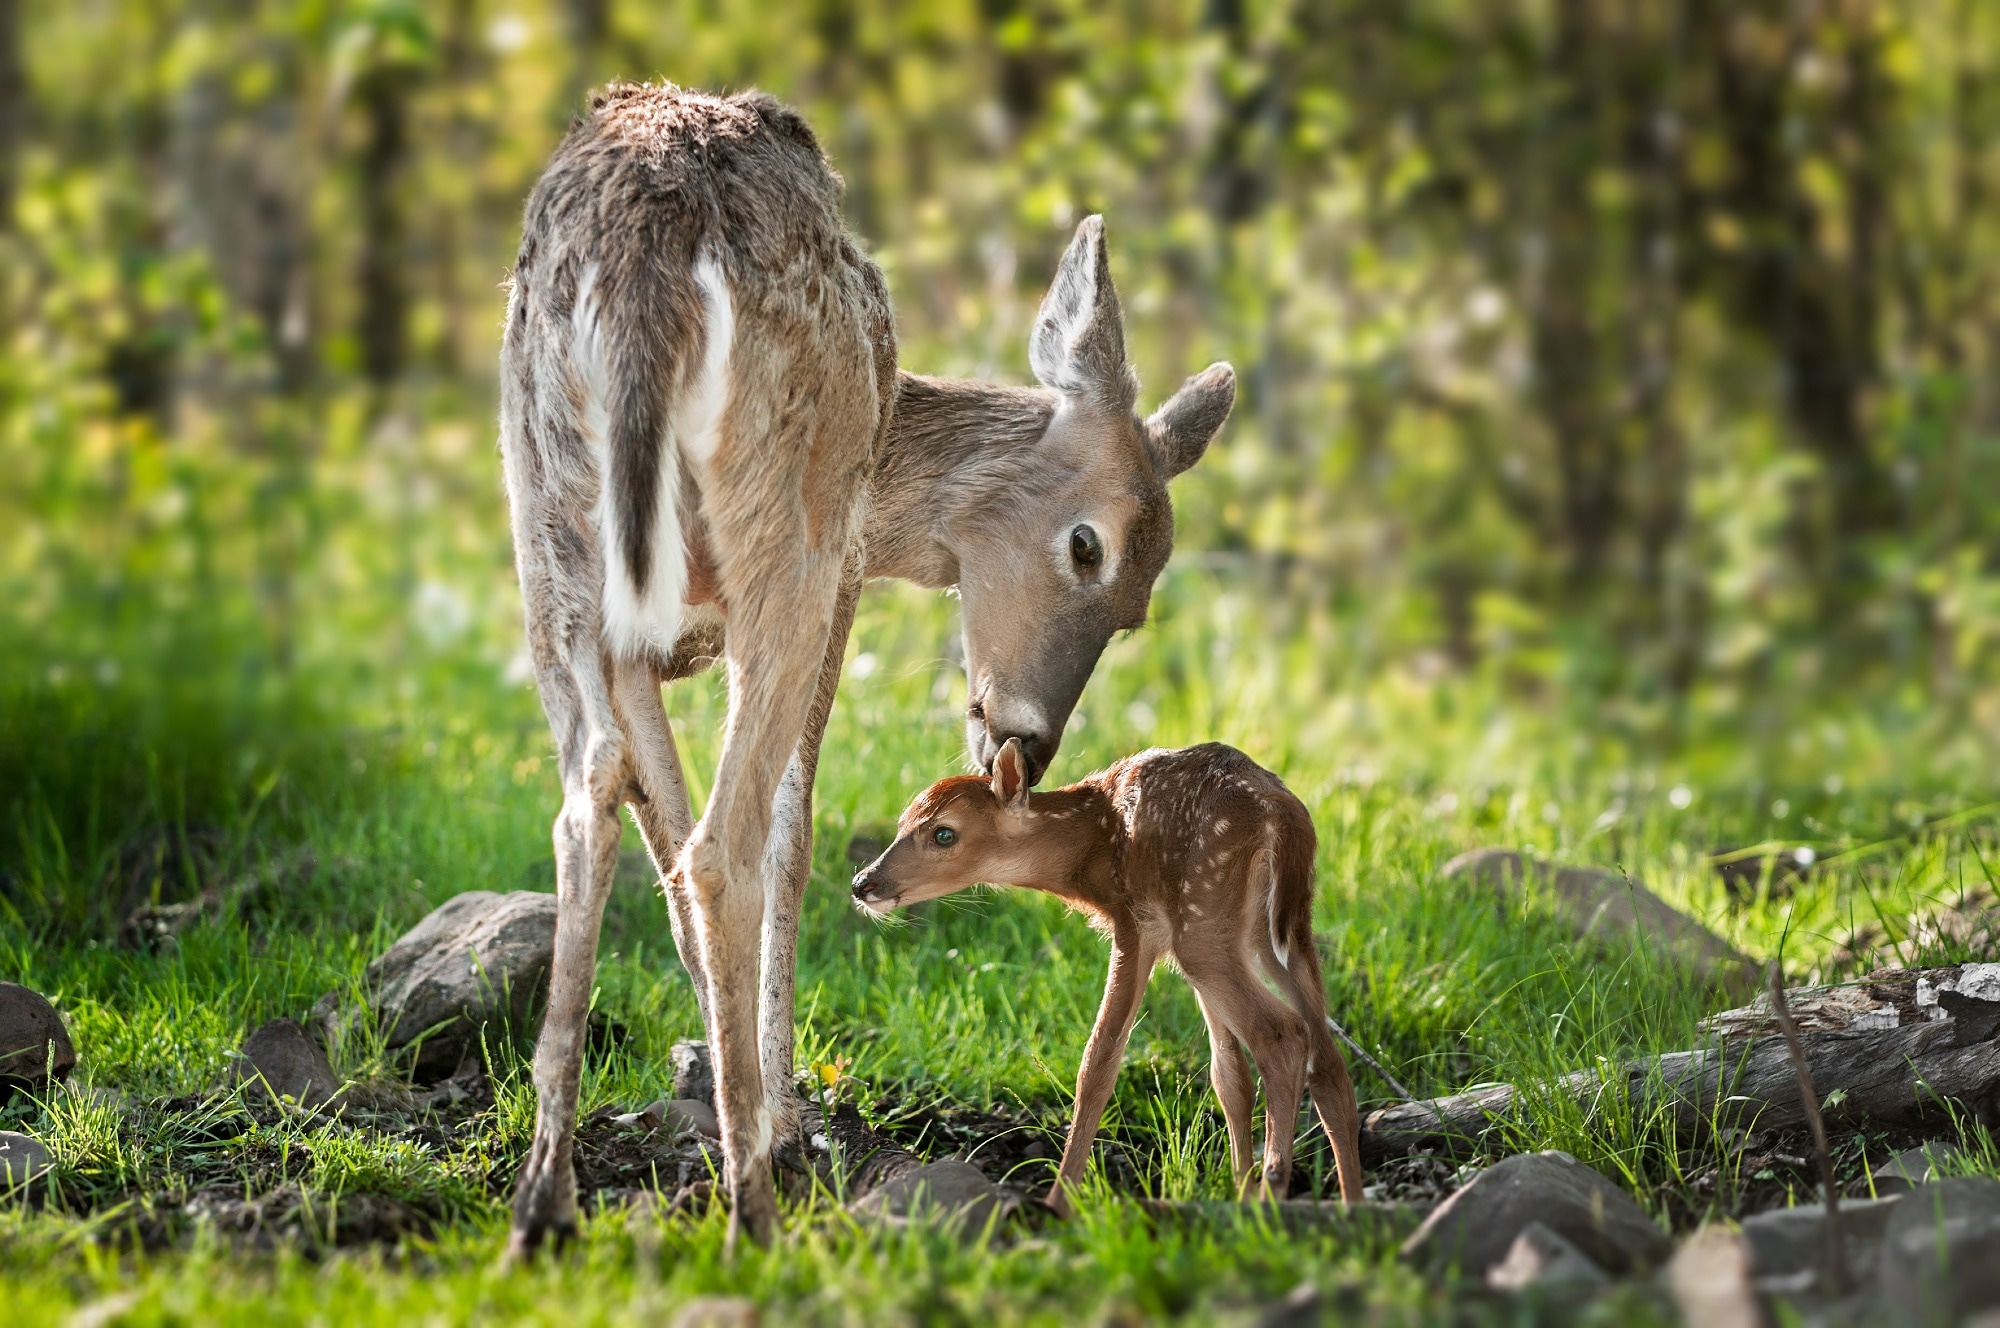 Study: Divergent SARS-CoV-2 variant emerges in white-tailed deer with deer-to-human transmission. Image Credit: Holly Kuchera/Shutterstock